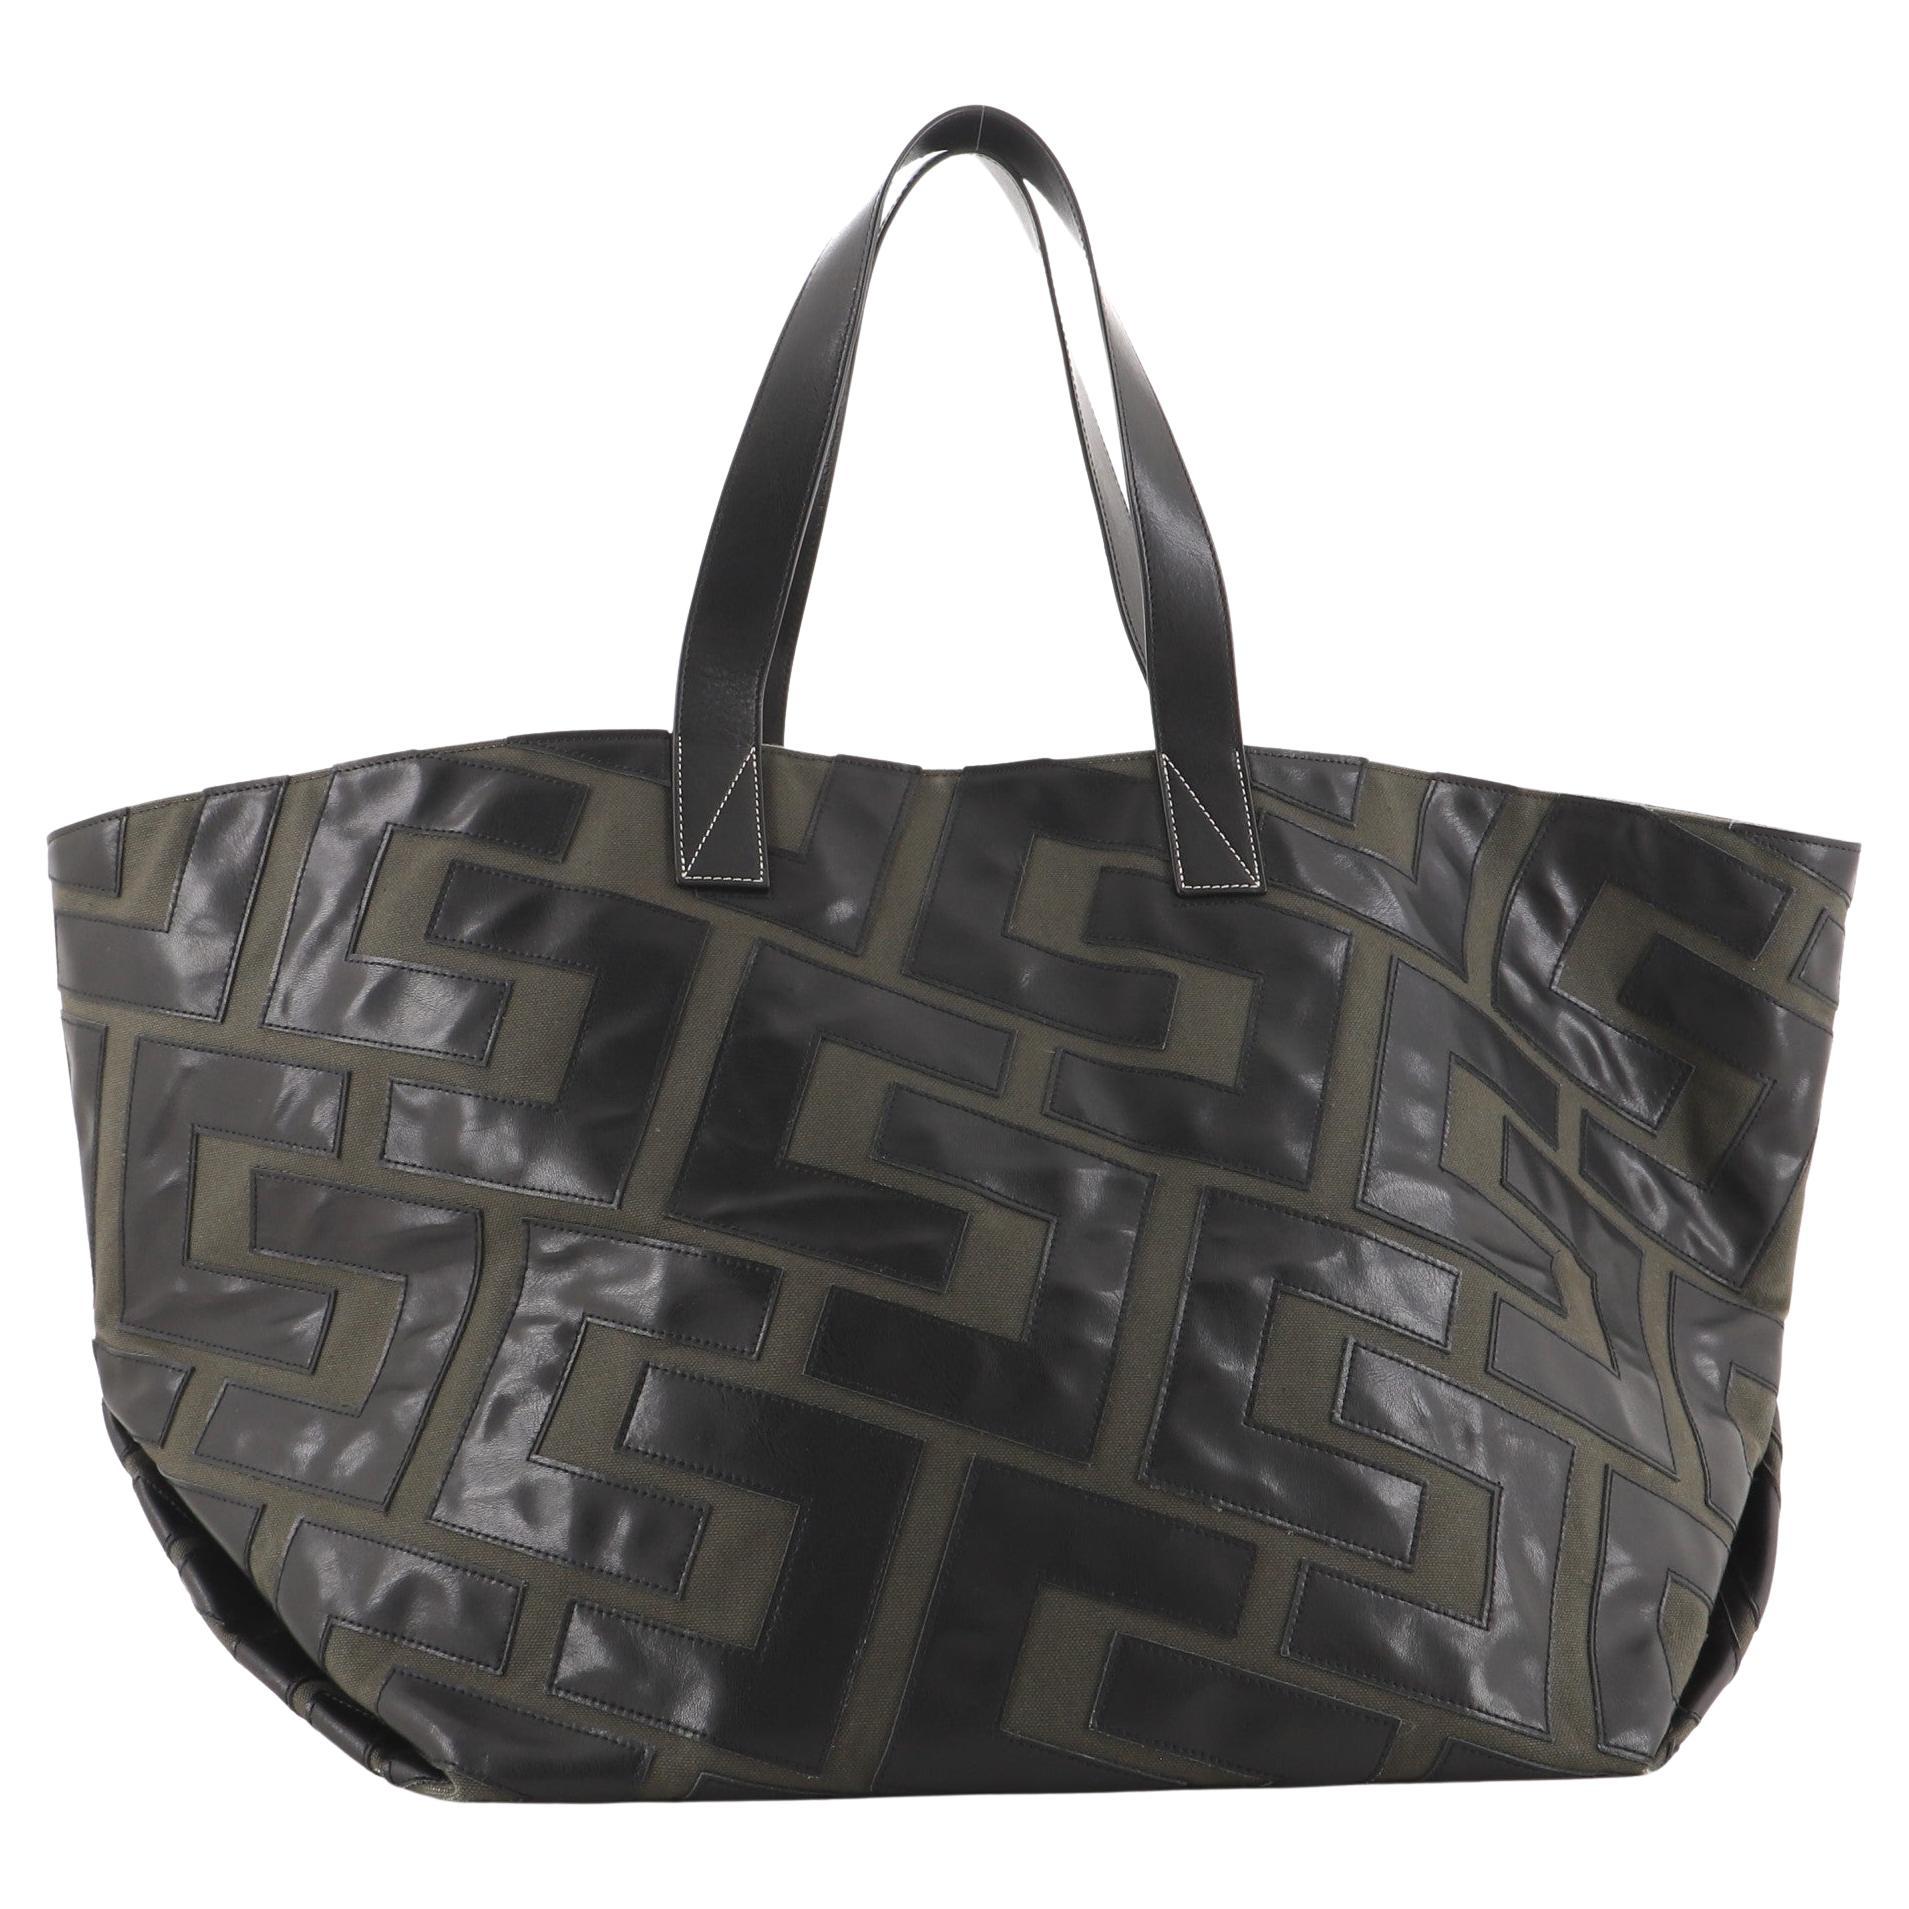 Celine Cabas Tote Patchwork Leather and Canvas Medium